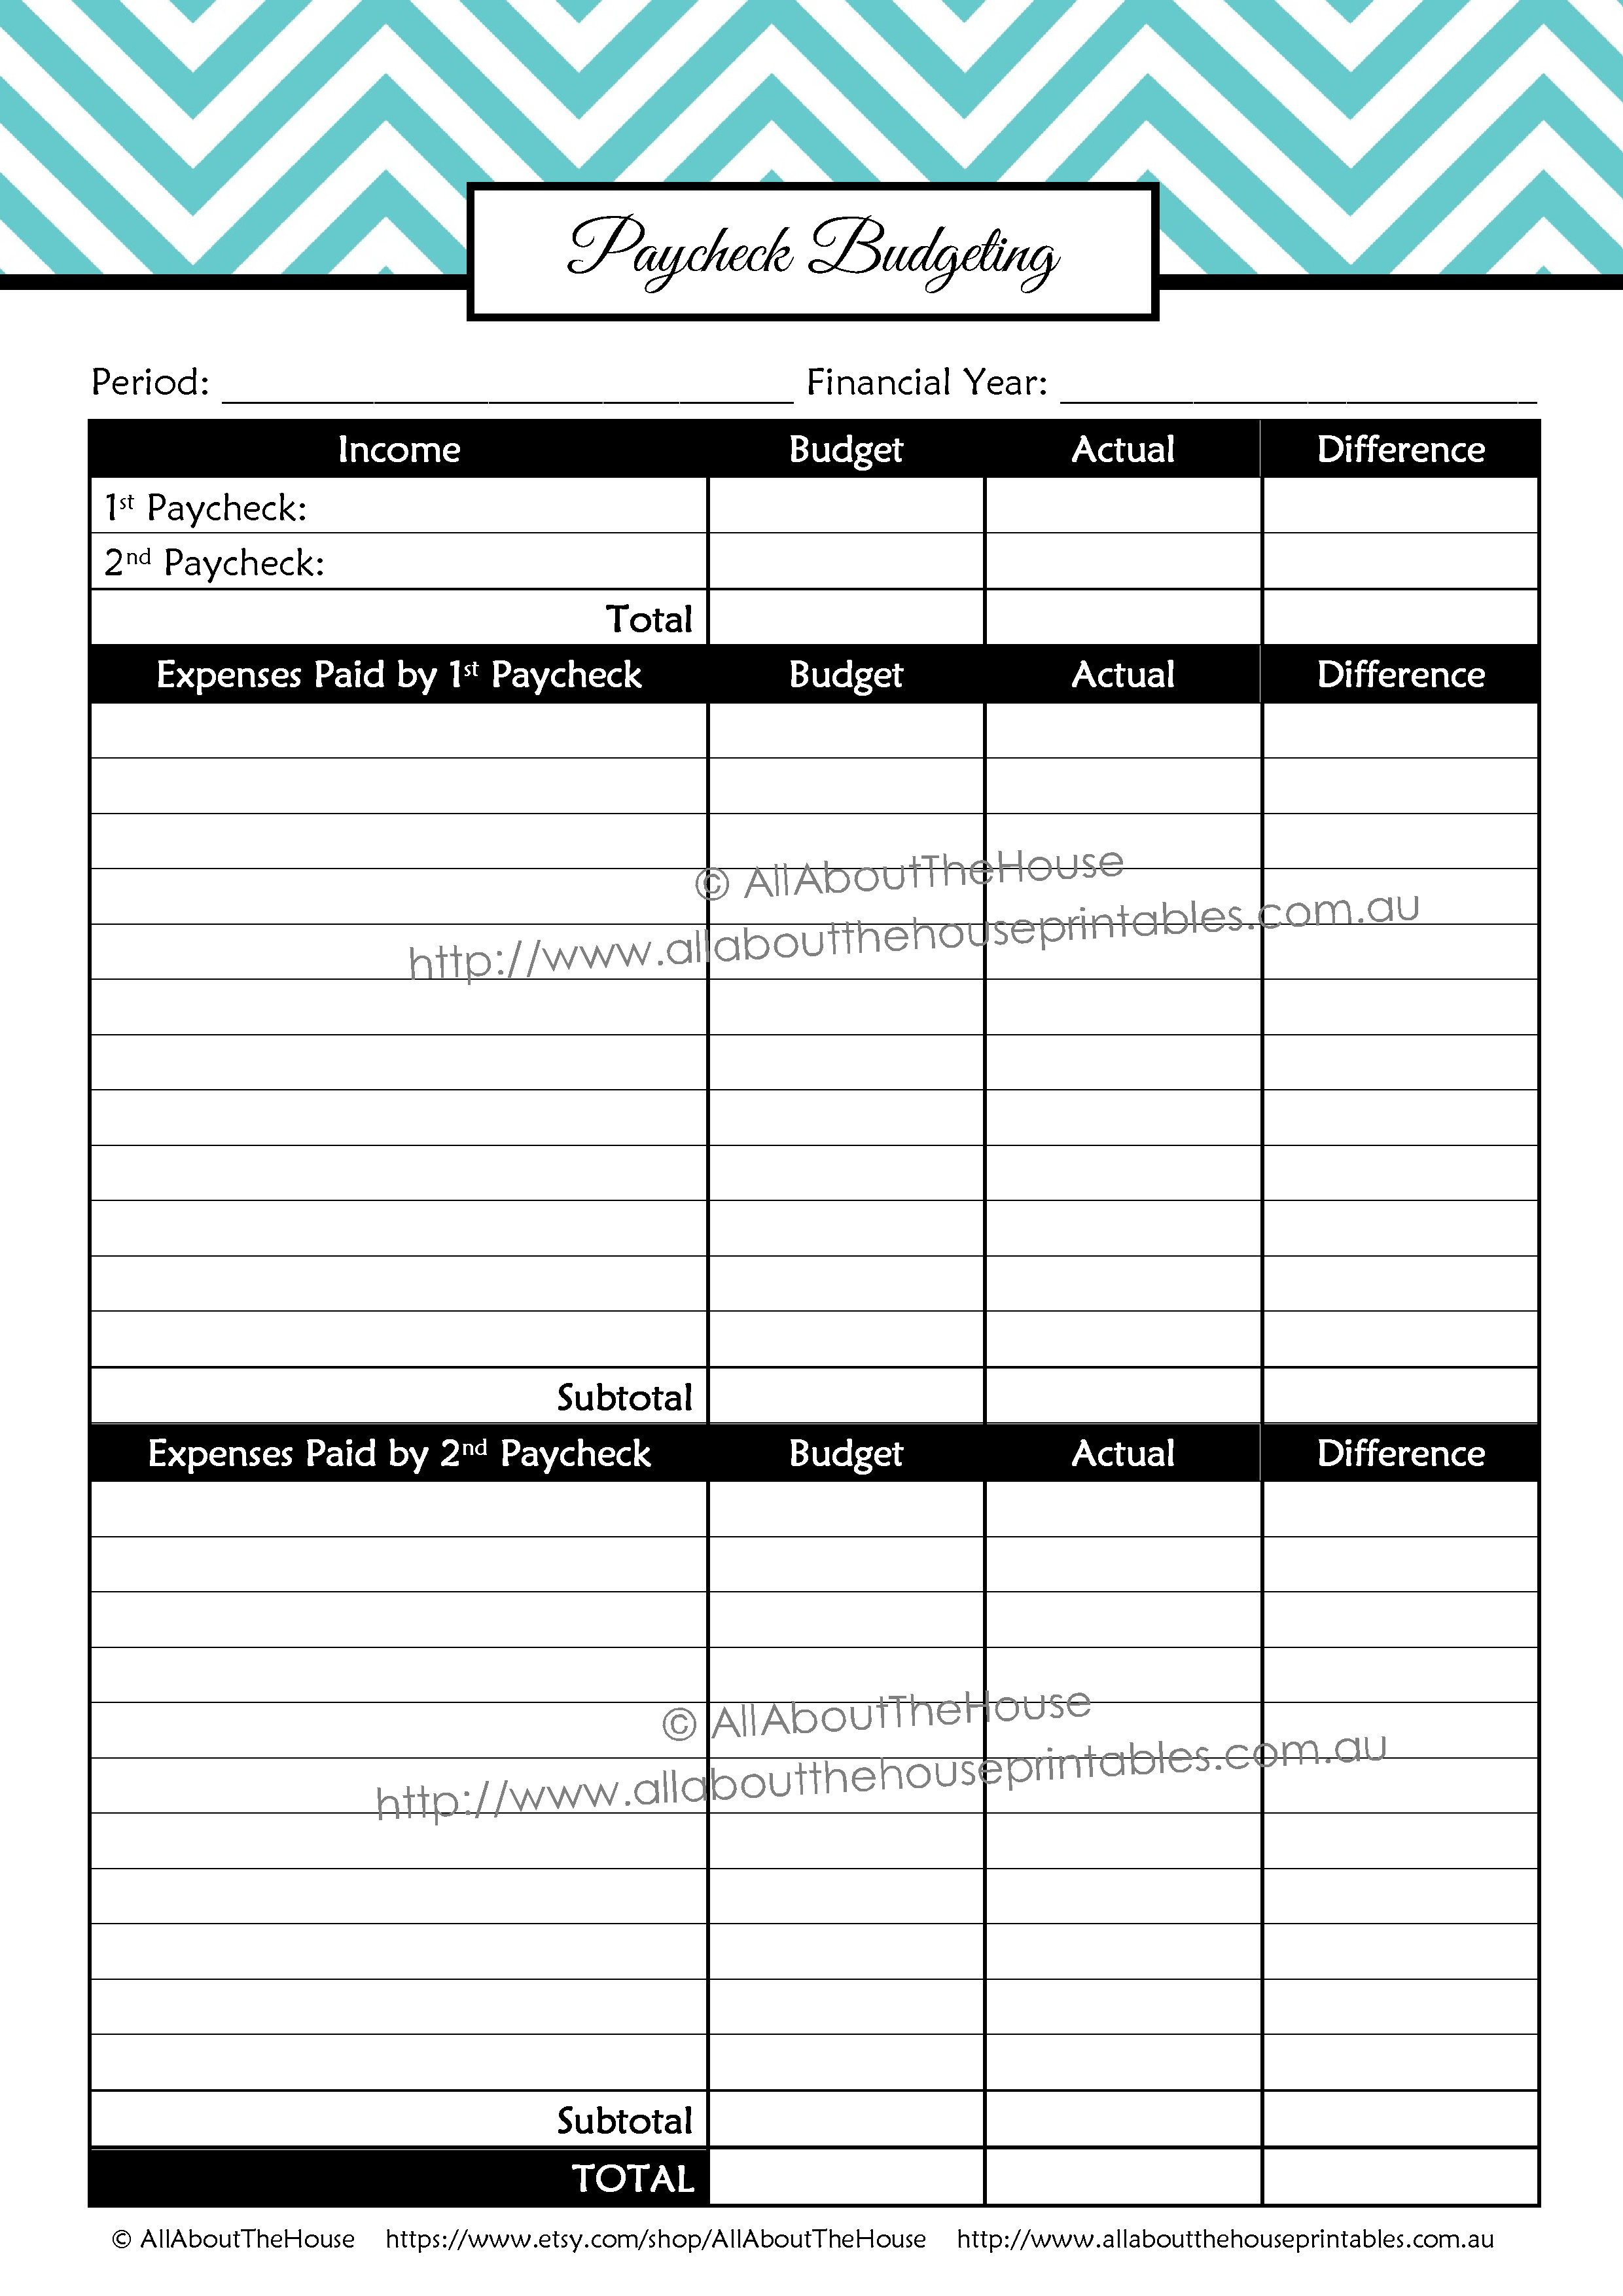 Printable Budget Plannerfinance Binder Update  All About Planners Inside Budget Planning Worksheets Pdf